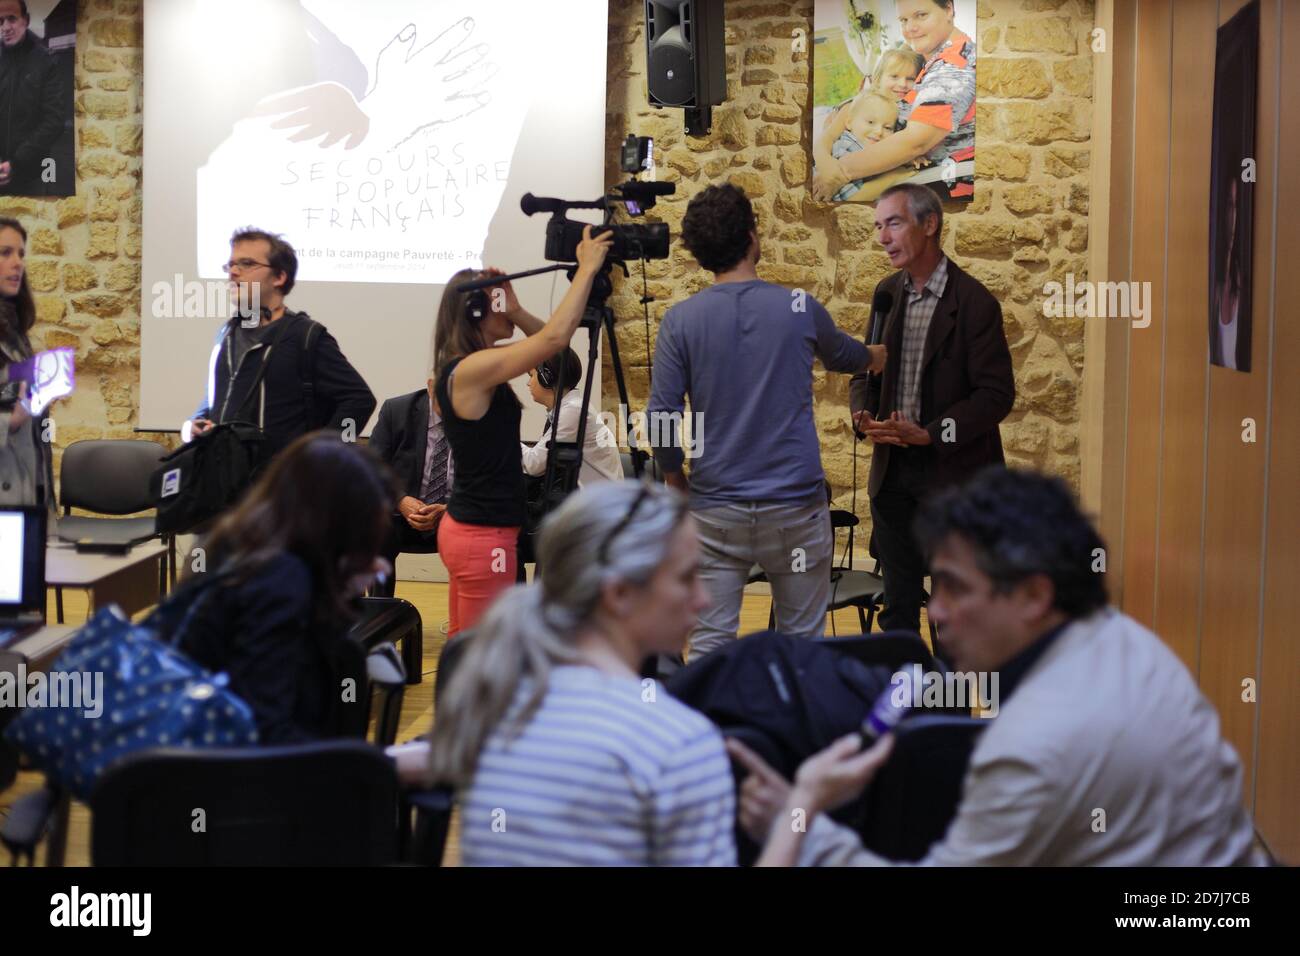 Press Conférence about poverty and precariousness at French popular relief in paris rue Froissart Stock Photo